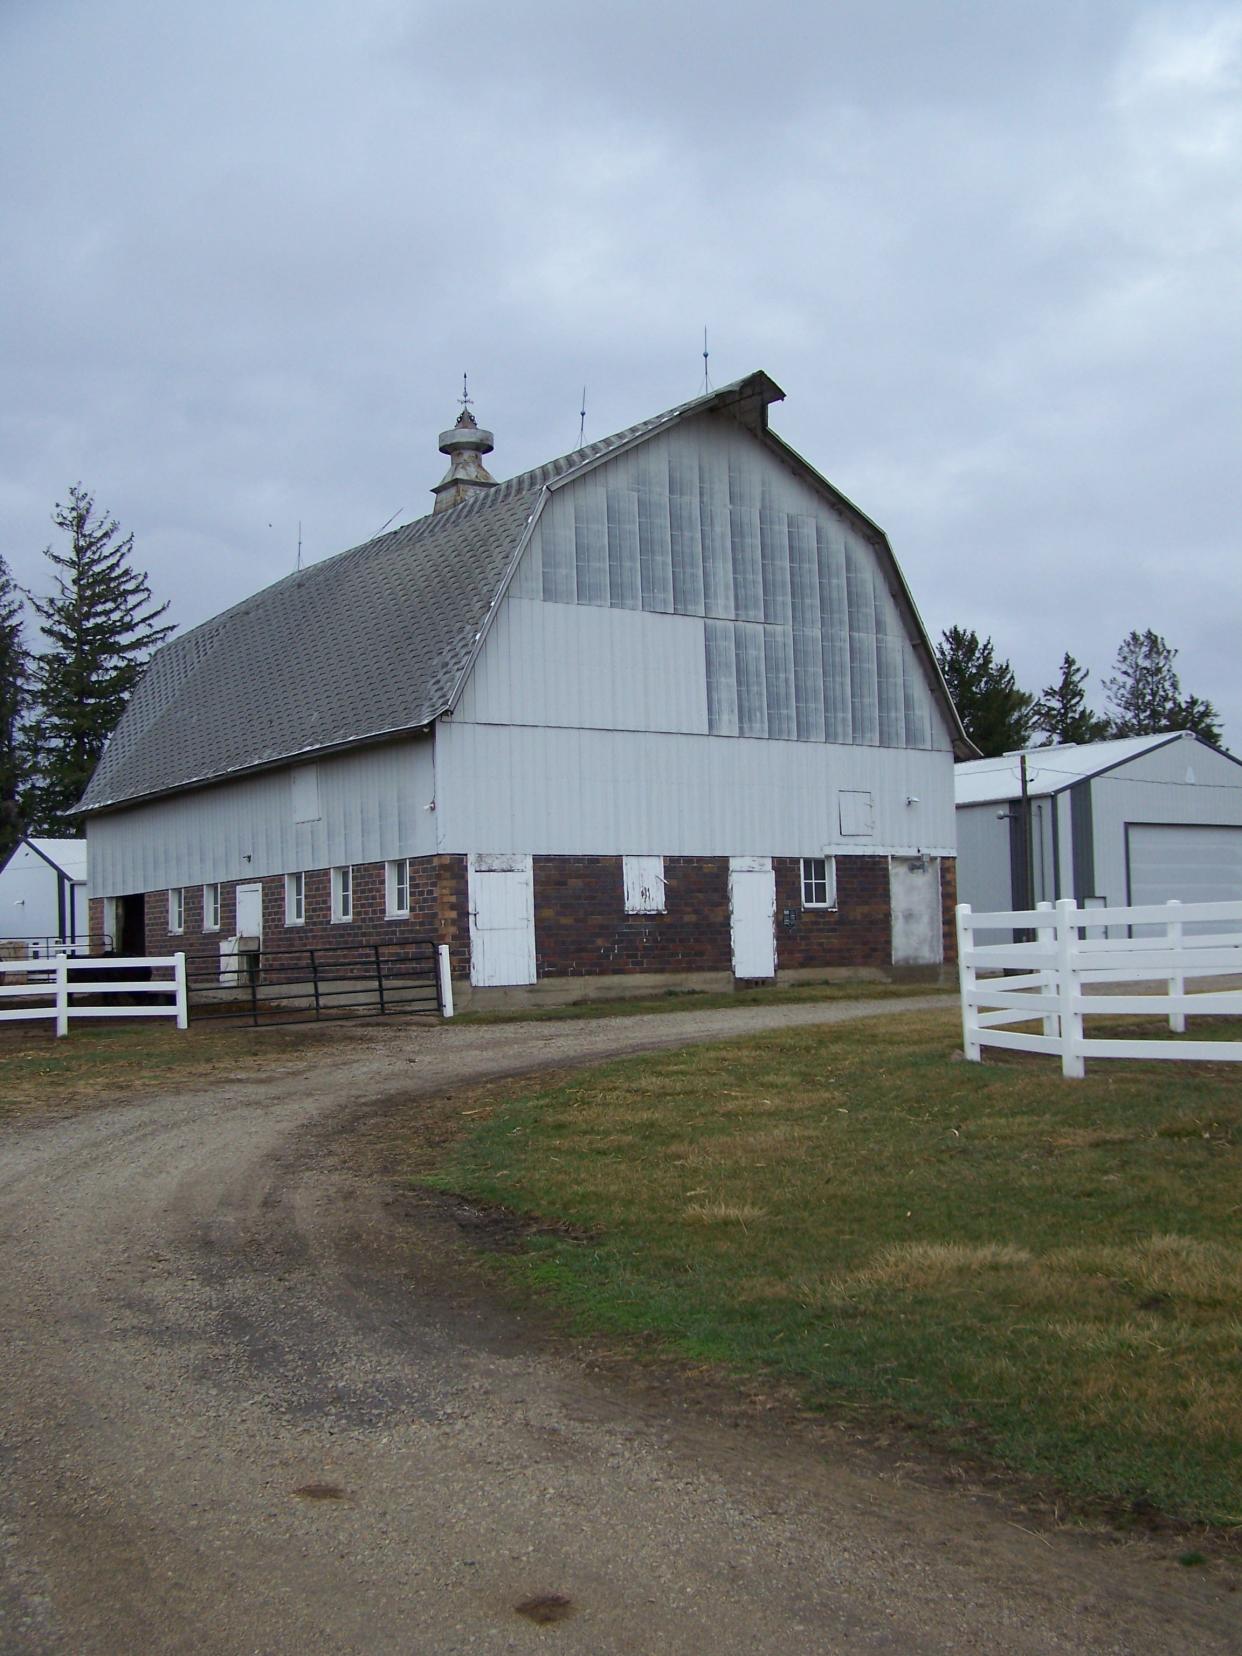 This barn built by CT Rierson in 1920 north of Radcliffe became an important site in development of the American Cream Draft Horse breed.